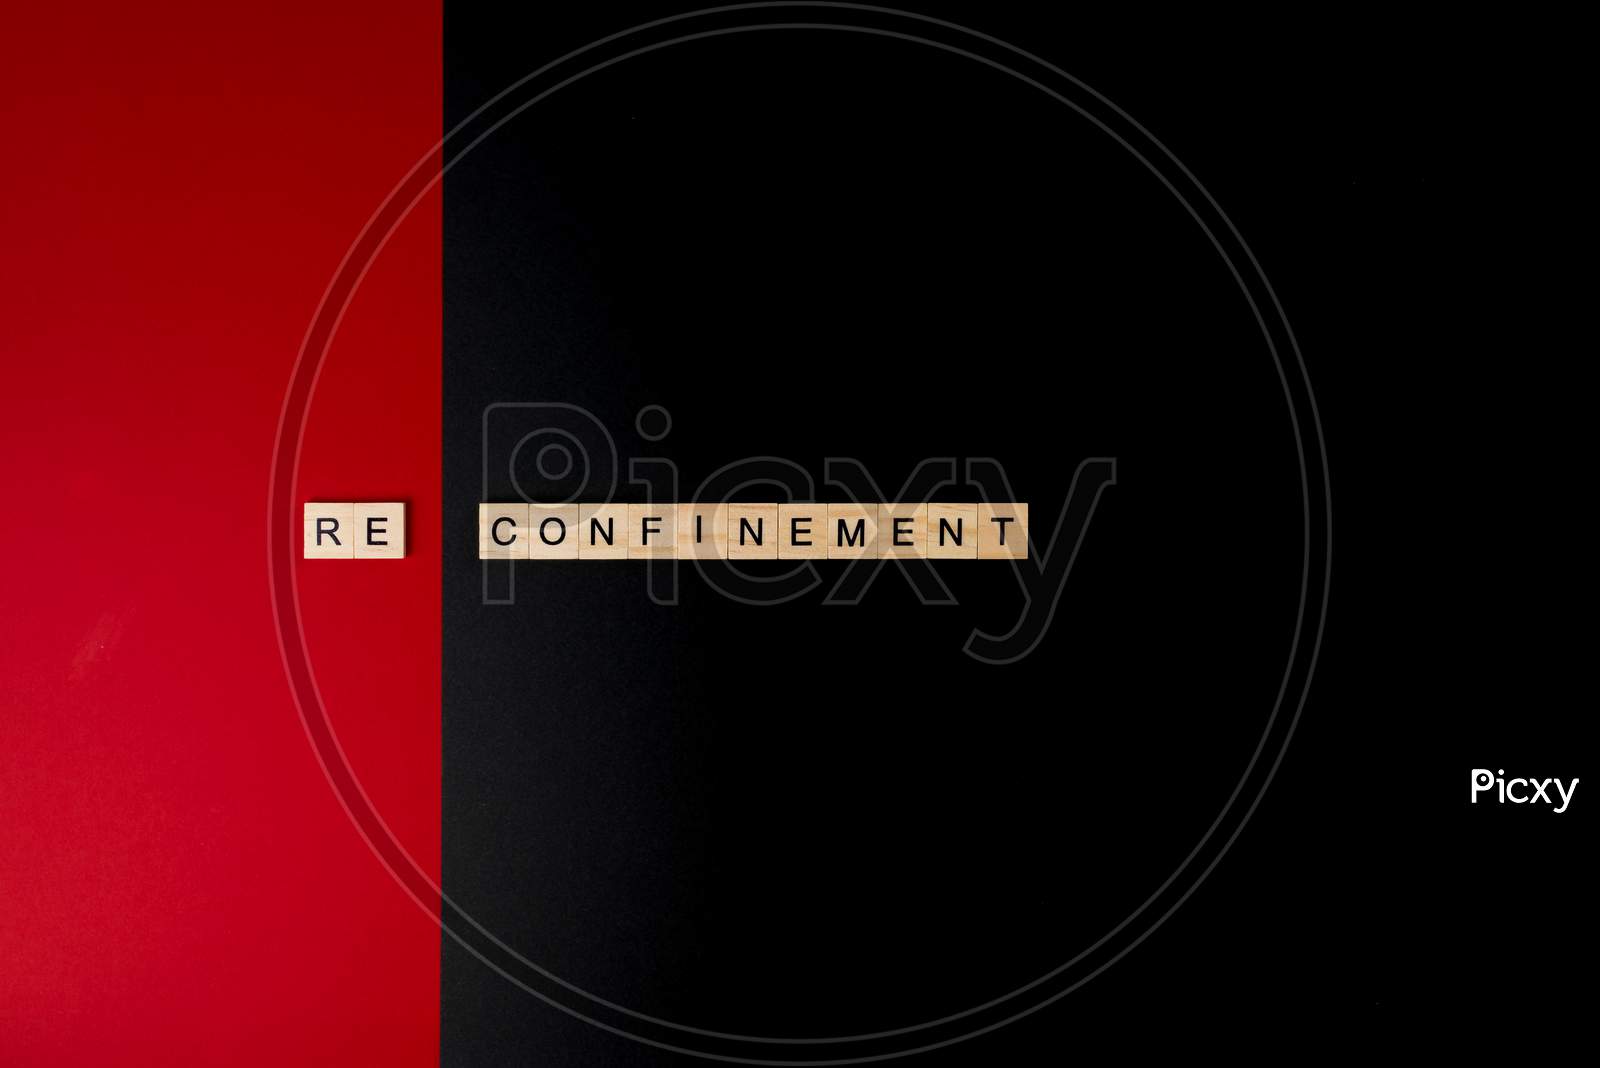 Wooden Letters On A Red And Black Background Forming The Word “Reconfinement”. Second Wave During Coronavirus Pandemic Concept.